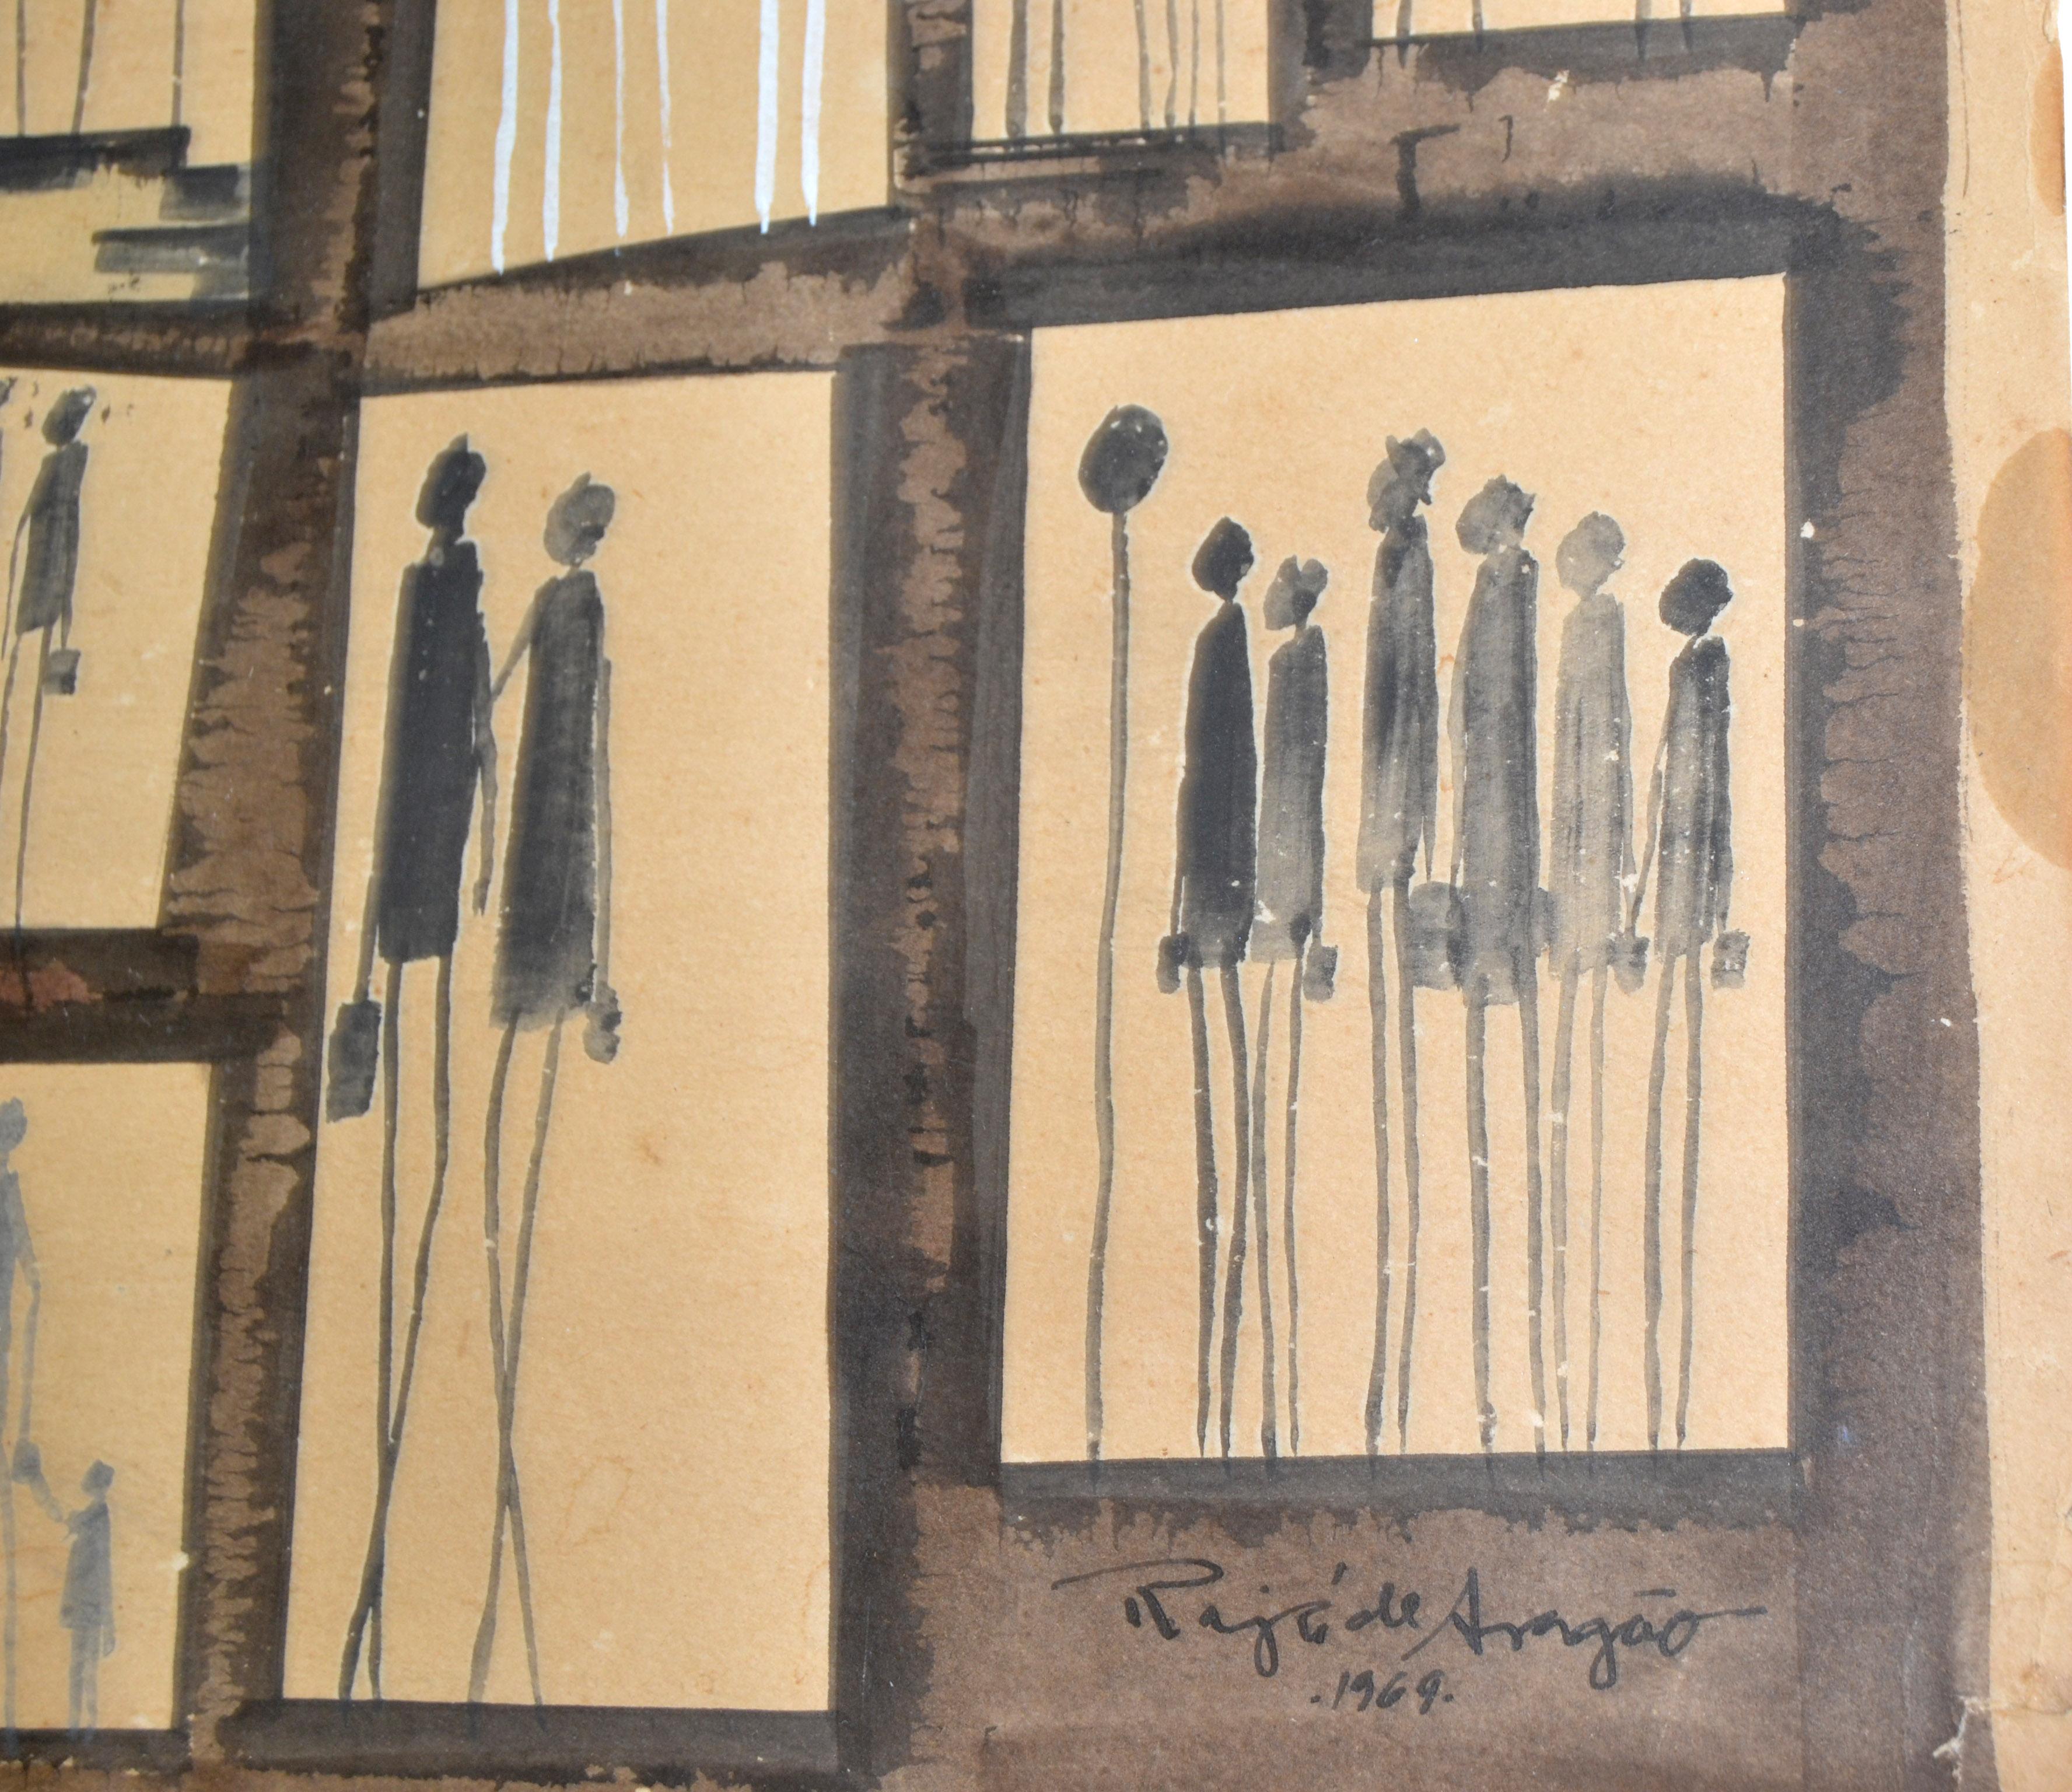 1969 Aragão Abstract Black & White Watercolor on Board Gilt Frame Stick Figures For Sale 3